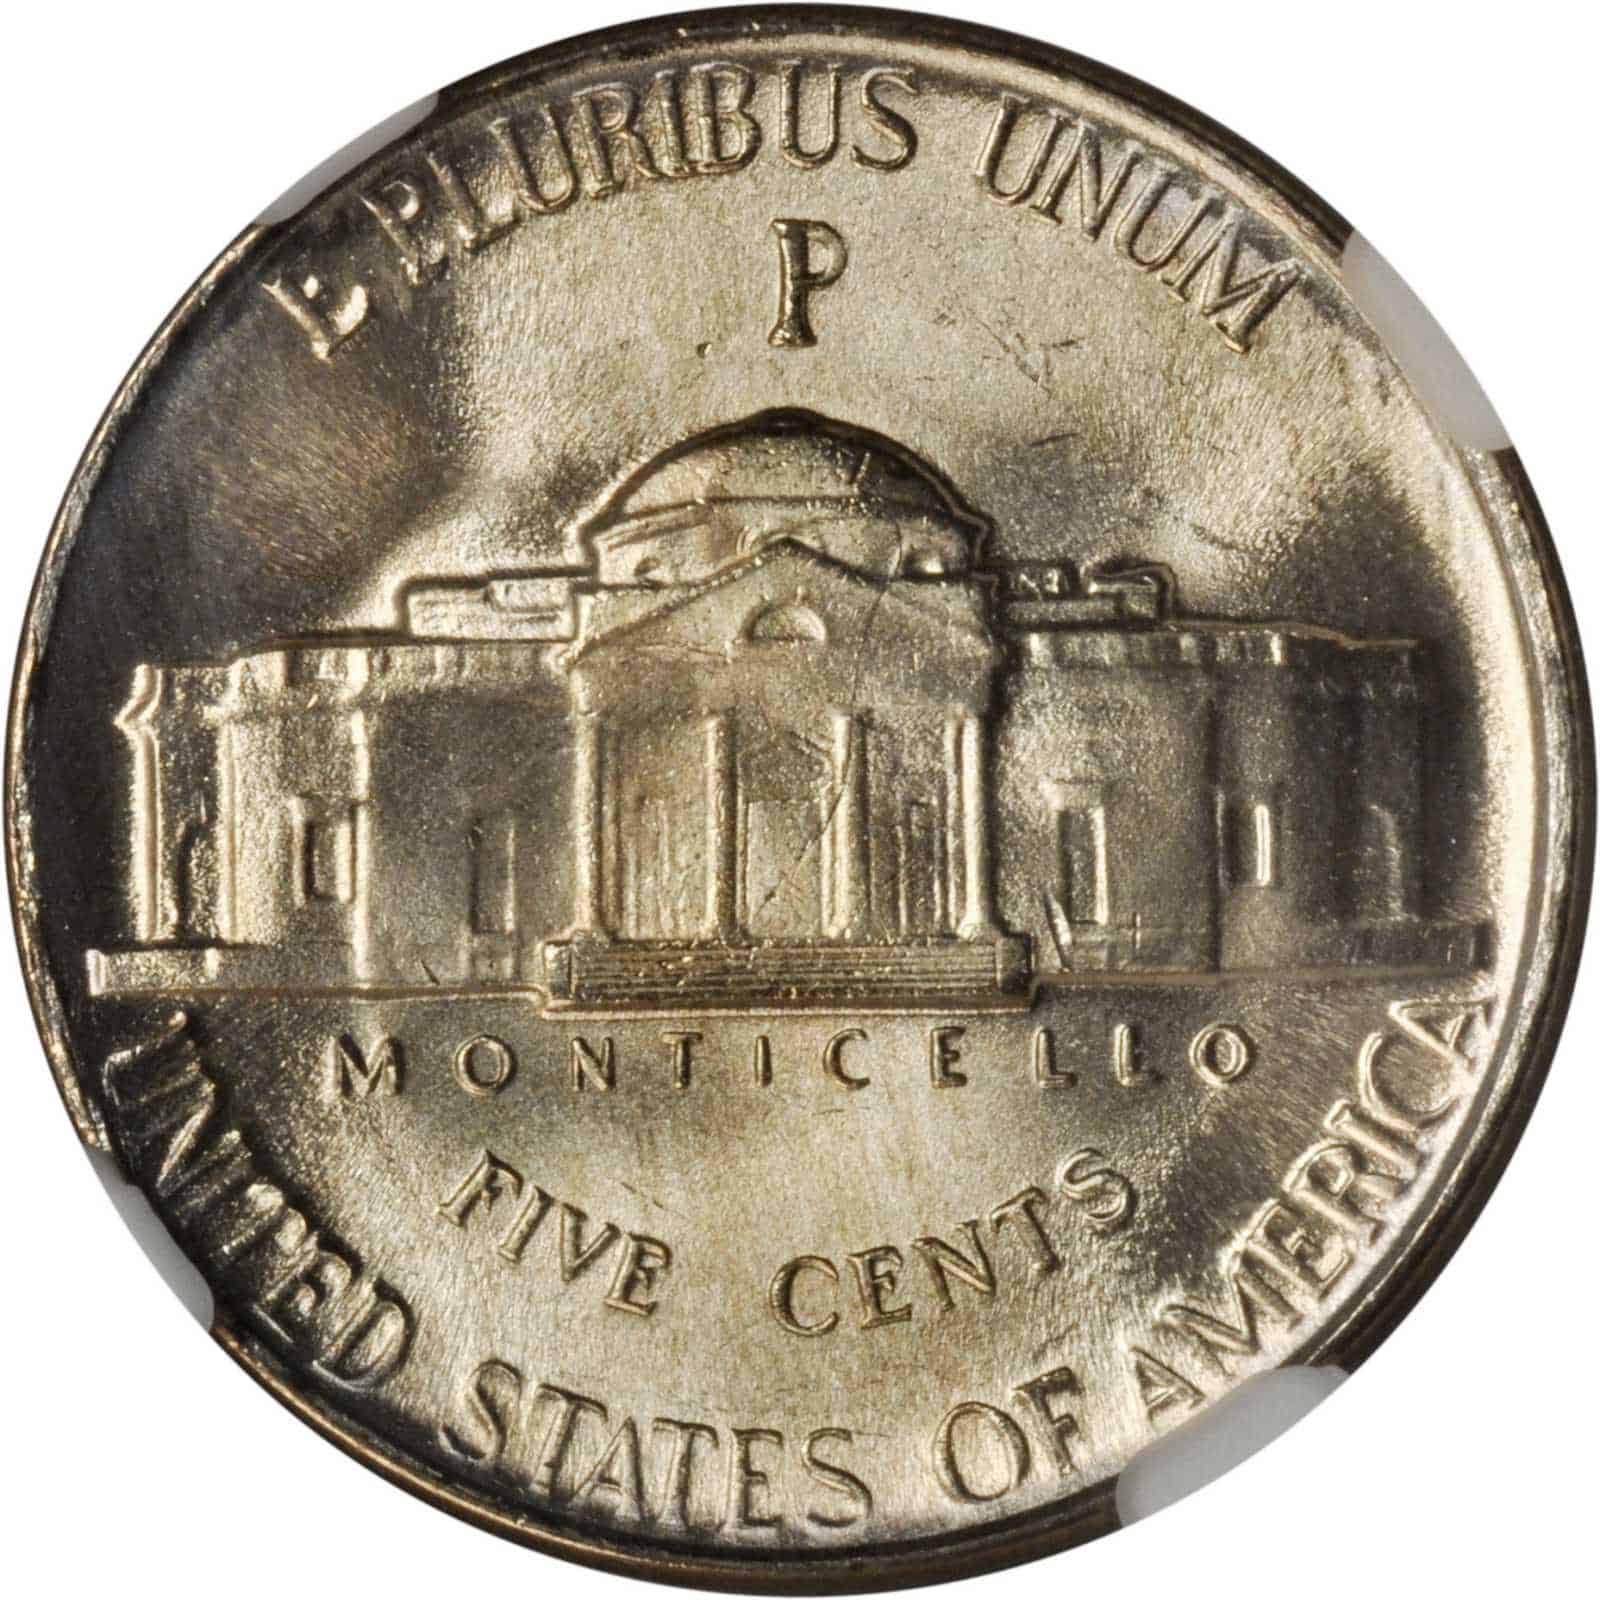 The Reverse of the 1943 Nickel